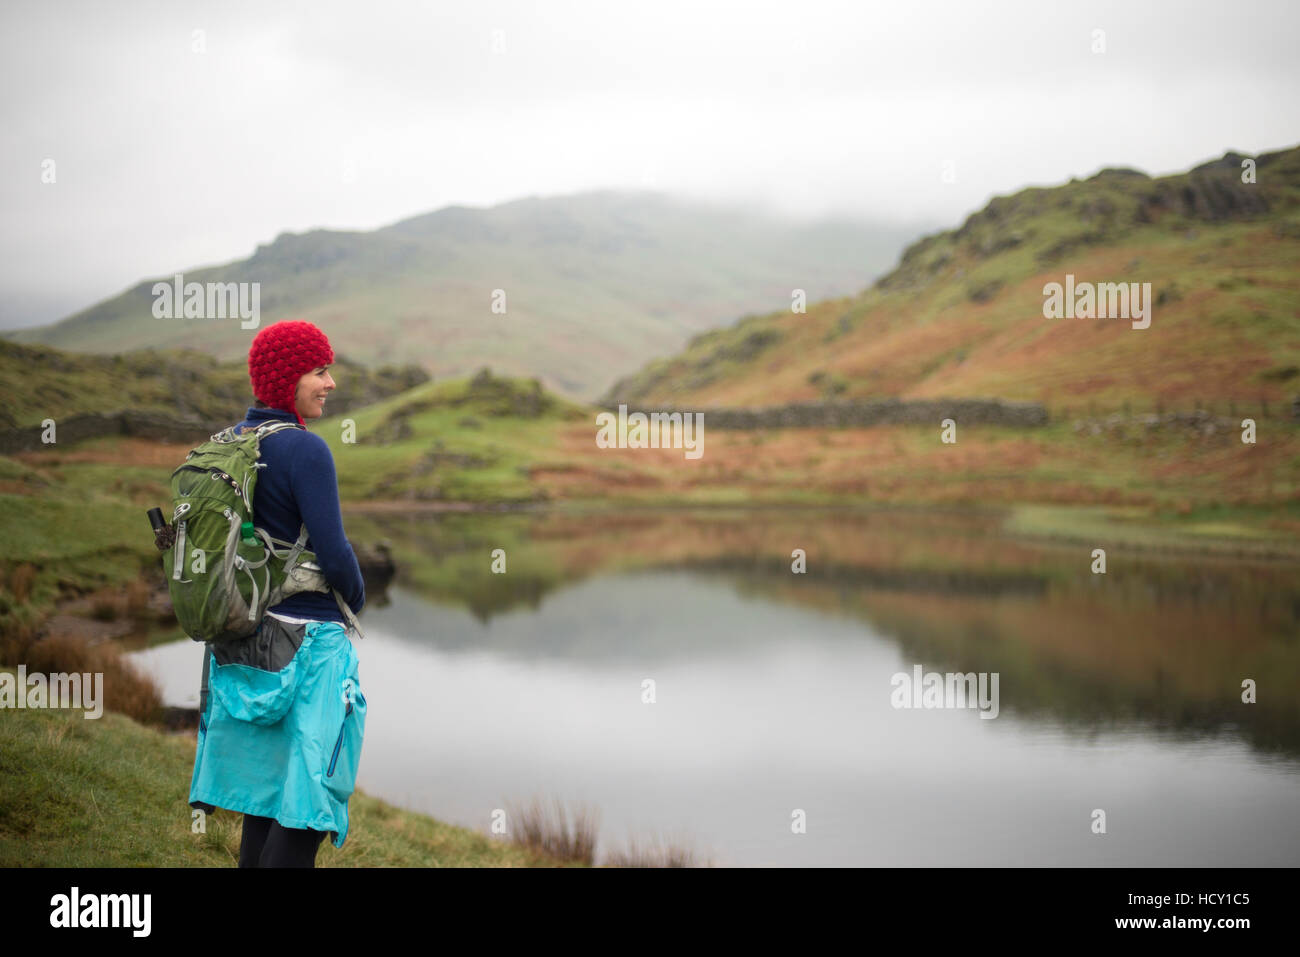 A woman looks out over Alcock Tarn near Grasmere, Lake District National Park, Cumbria, UK Stock Photo